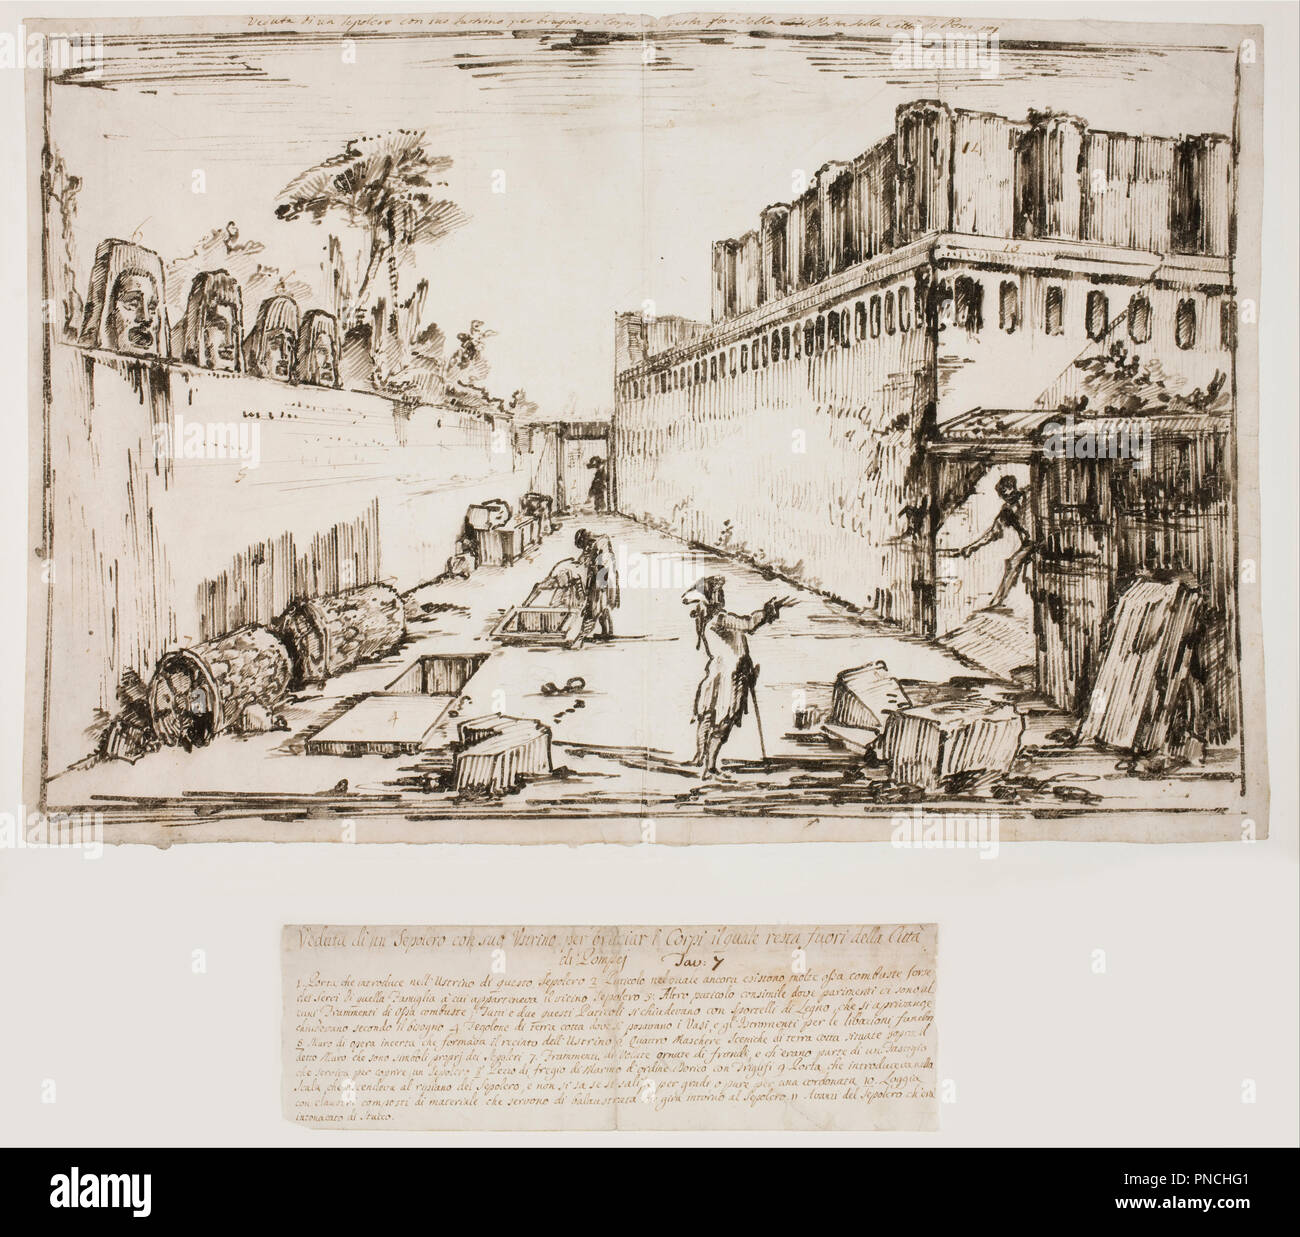 The Tomb of the Istacidi, Pompeii. Date/Period: Ca. 1777. Drawing. Pencil, reed pen, black ink. Height: 515 mm (20.27 in); Width: 775 mm (30.51 in). Author: GIOVANNI BATTISTA PIRANESI. Stock Photo